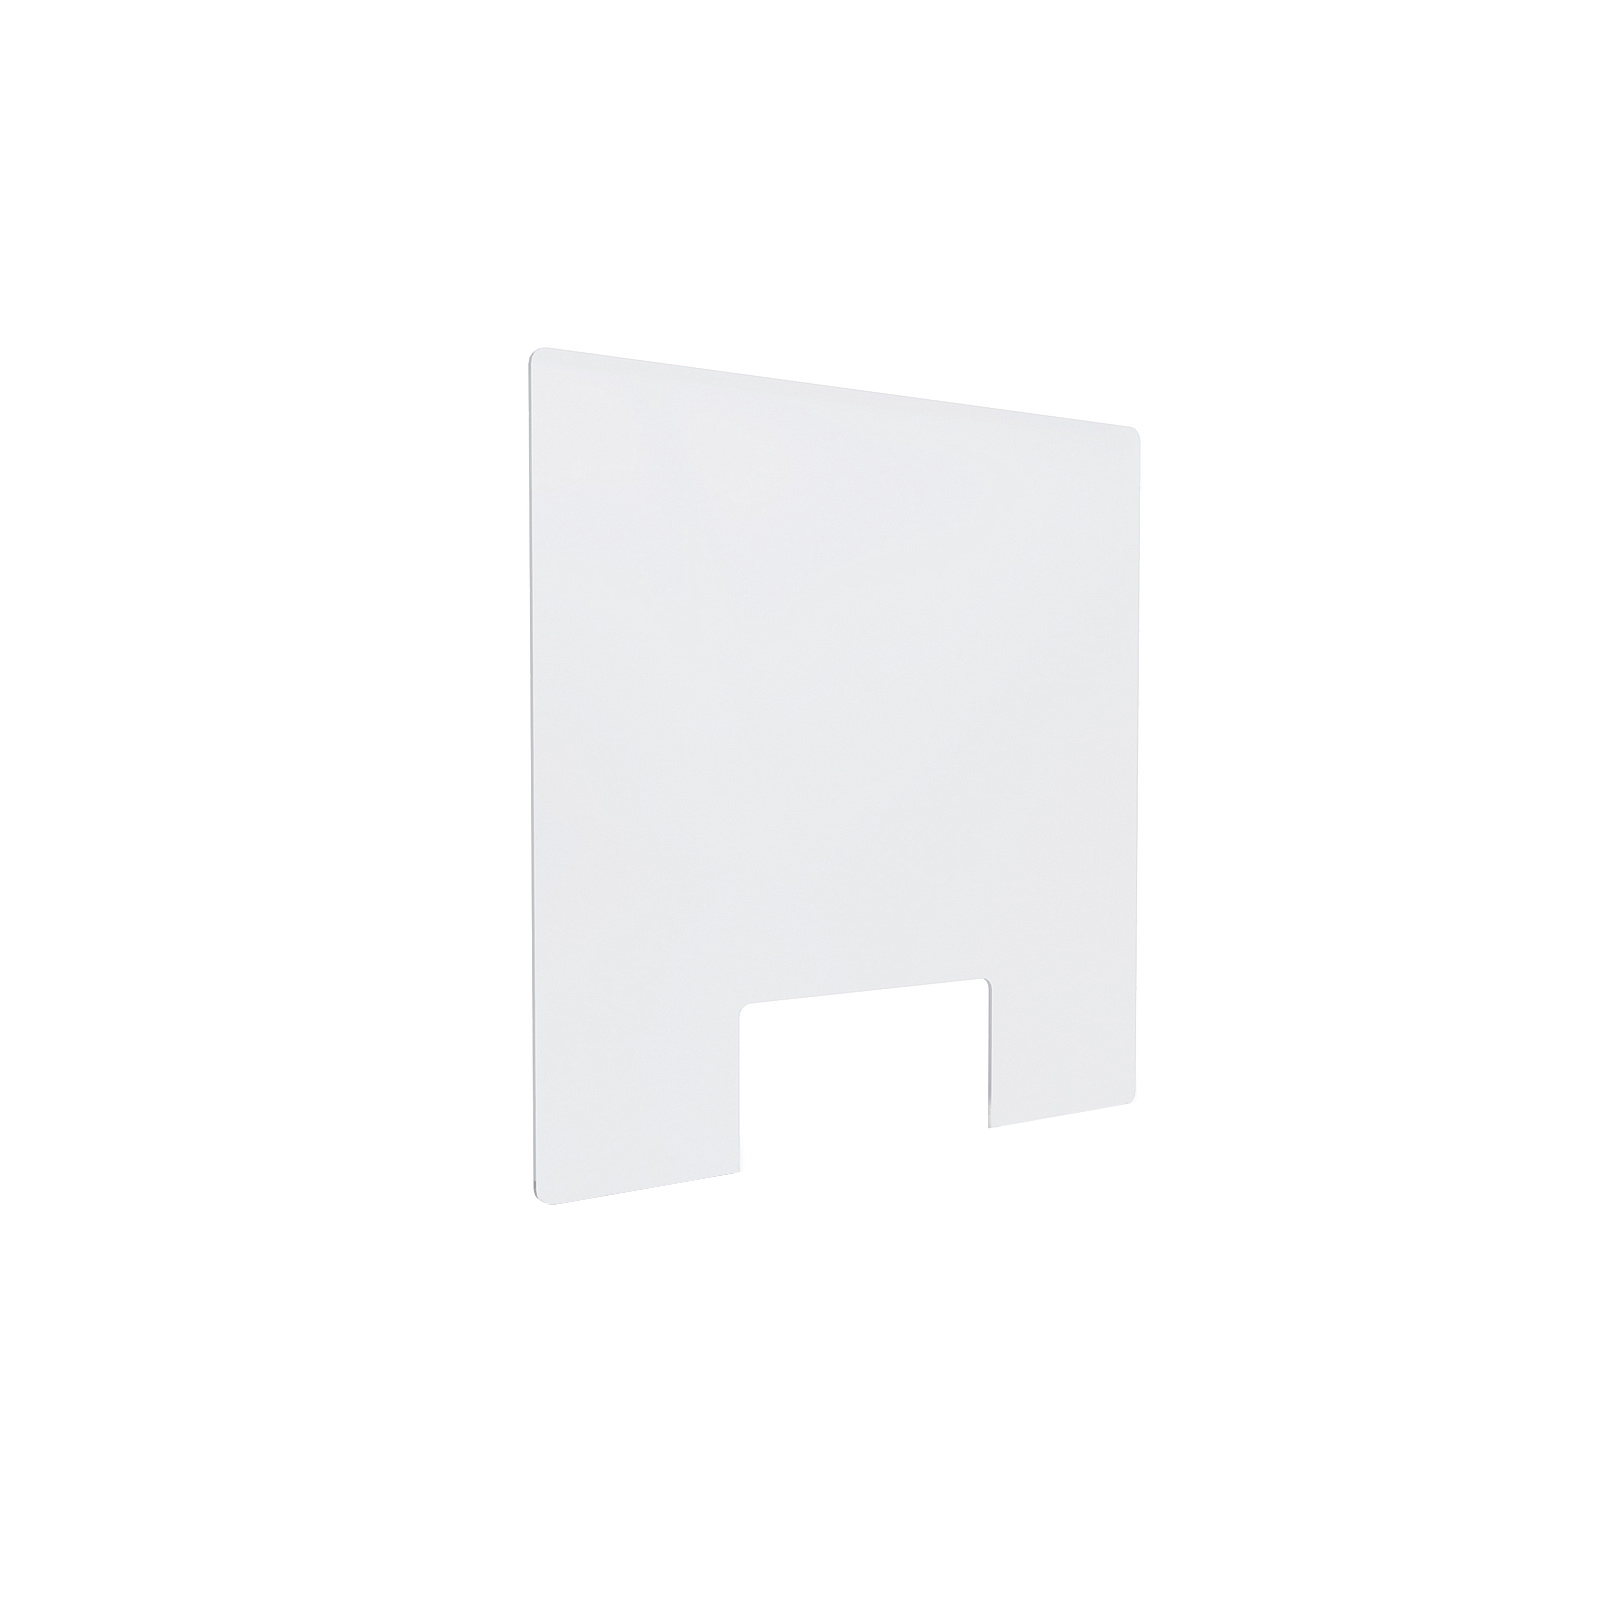 Clear Acrylic Sneeze Guard 23-1/2'' Wide x 23-1/2'' Tall (10'' x 5'' Cut Out) x 0.157'' Thickness